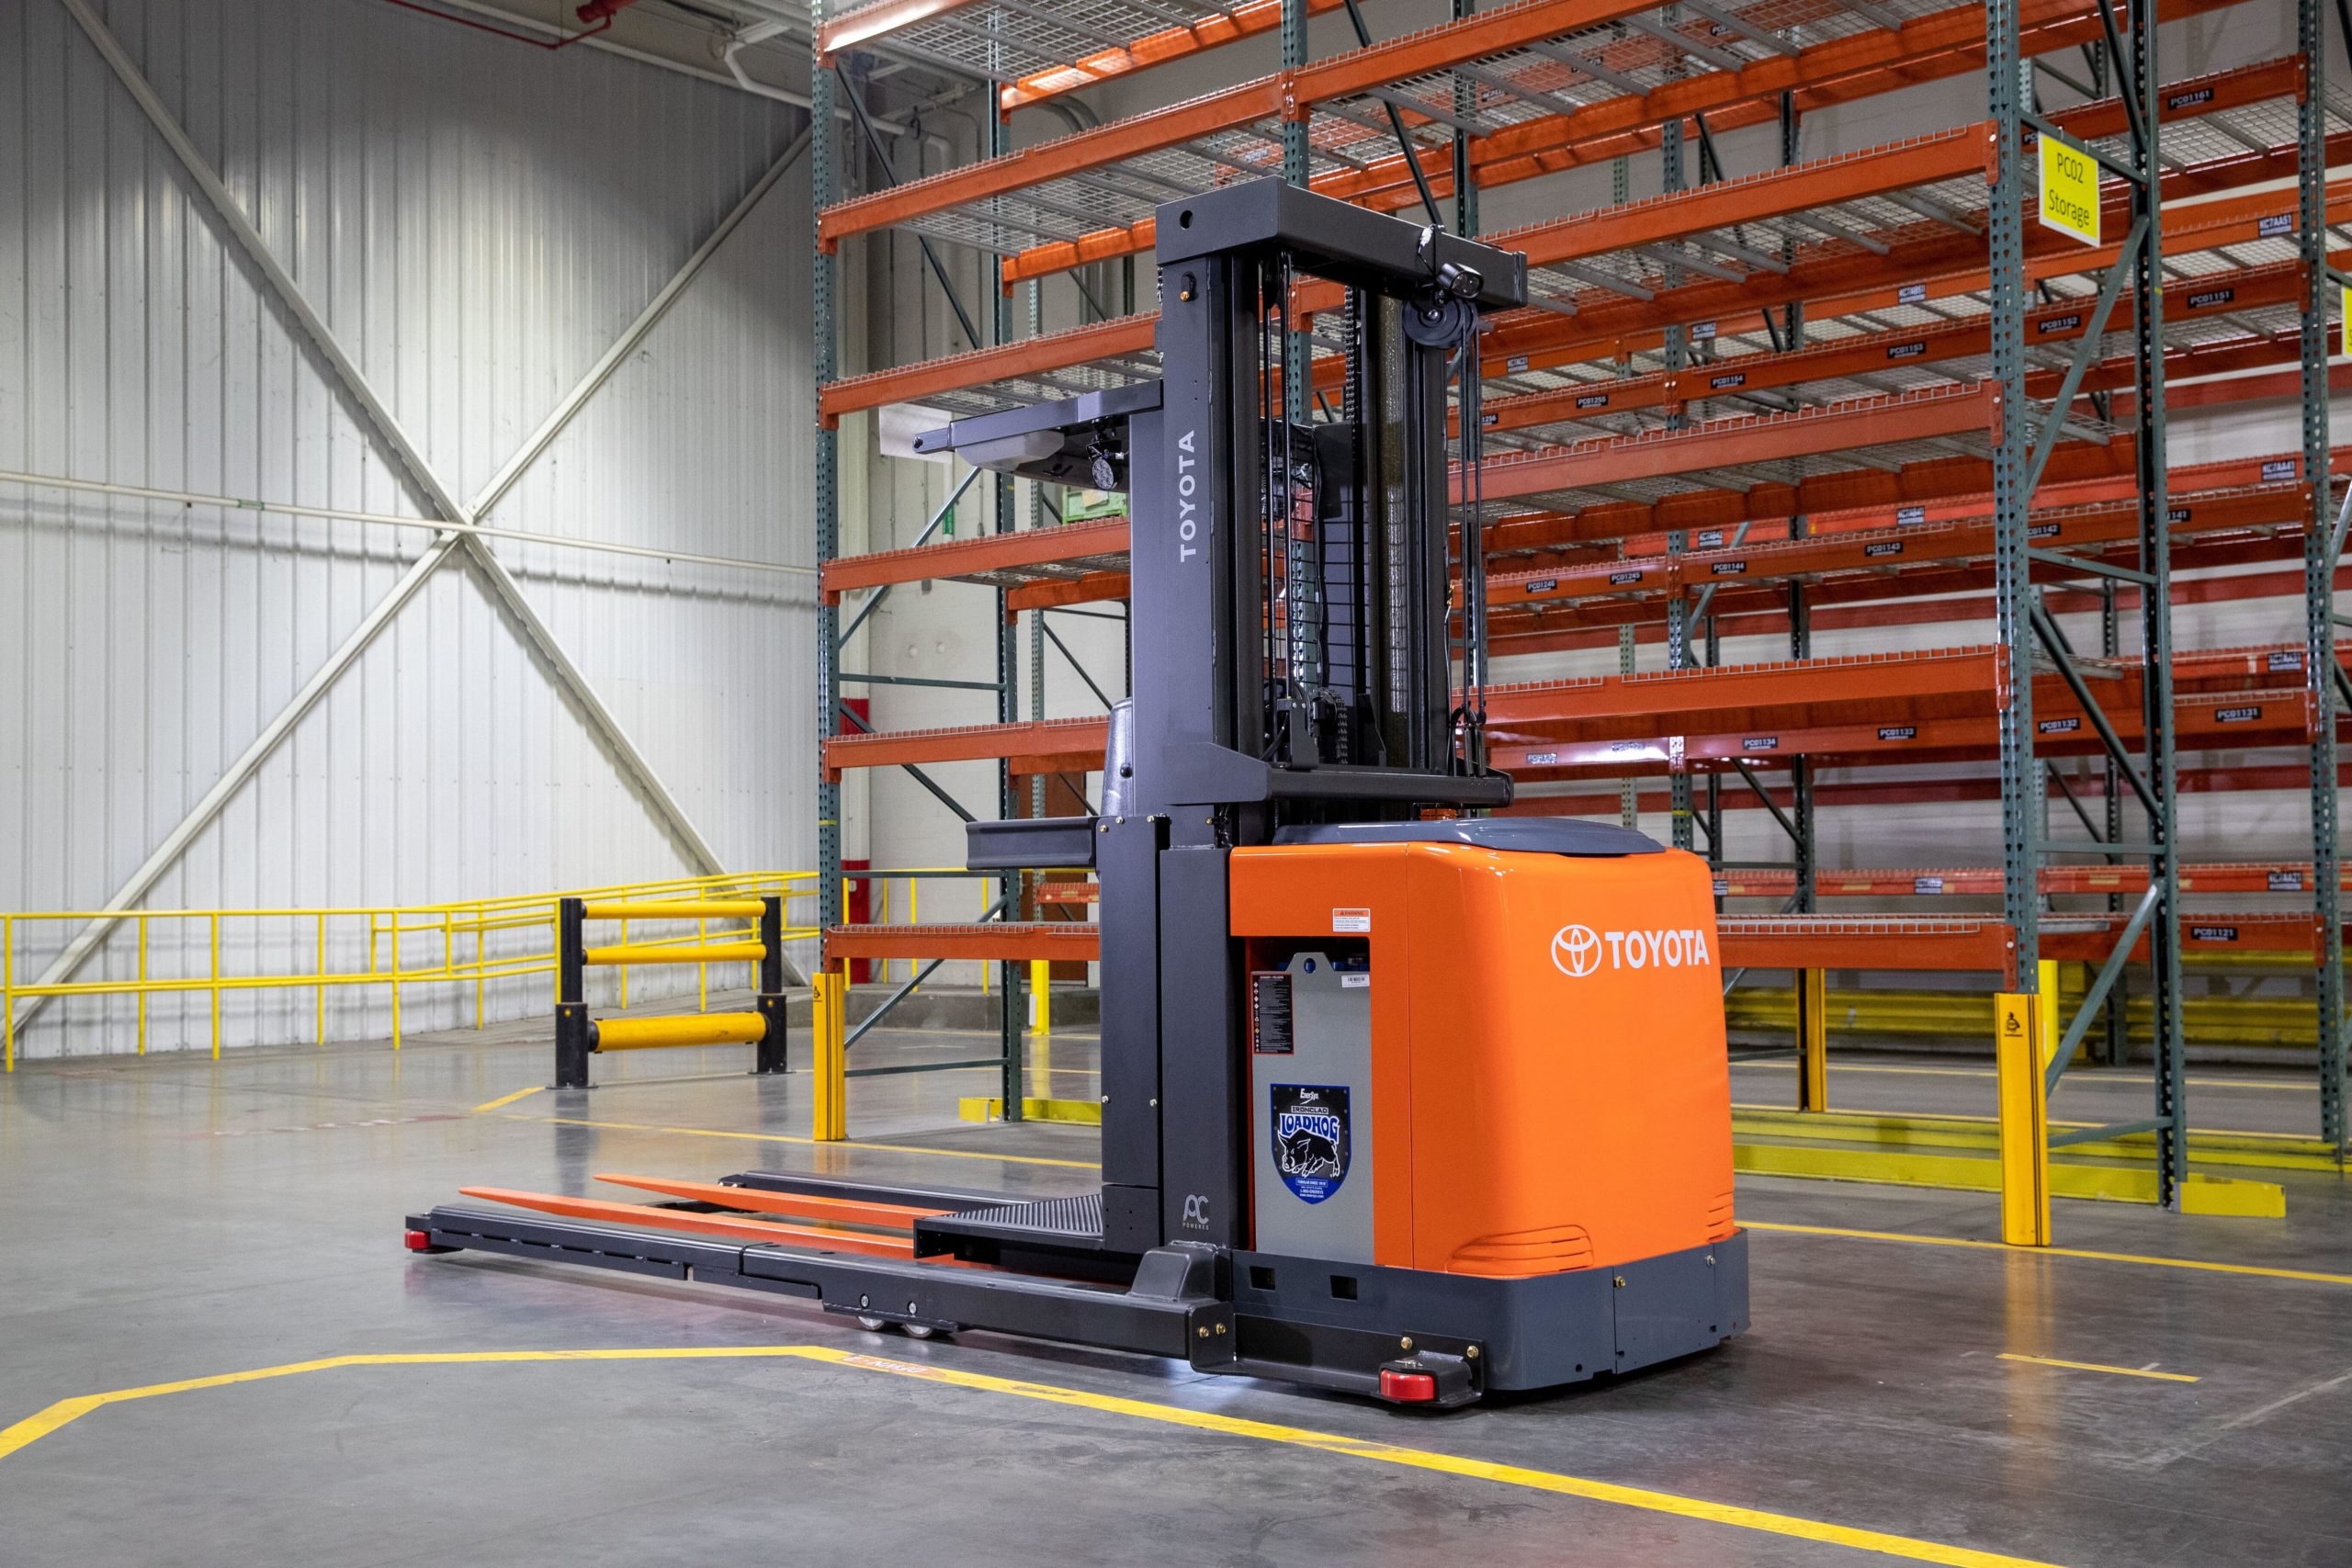 How to Operate a Forklift, Order Picker